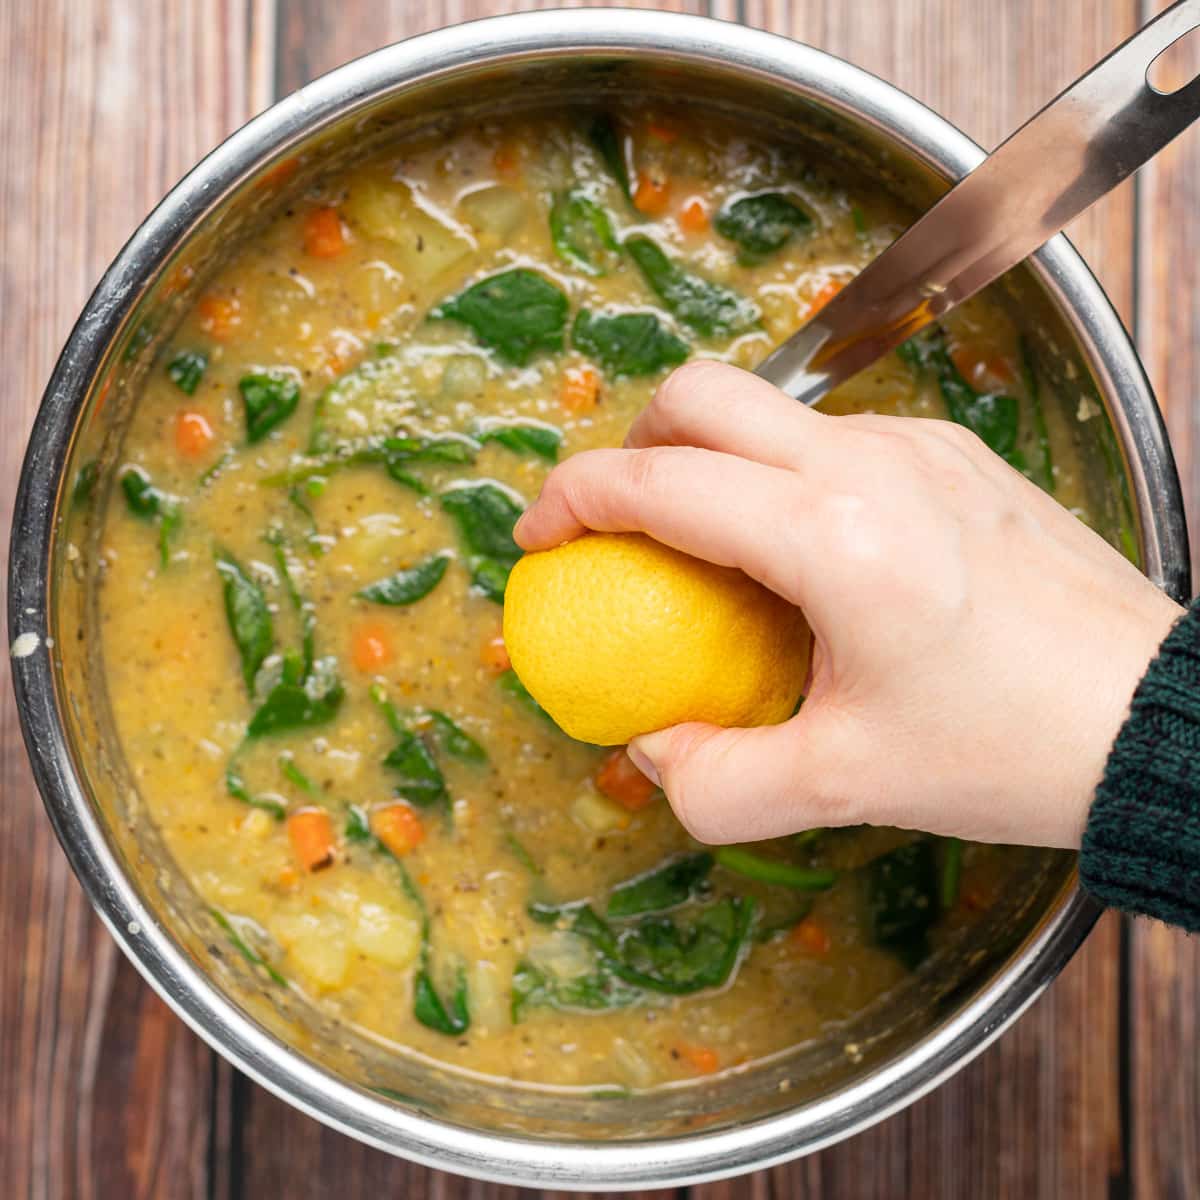 lemon being squeezed into a pot of soup